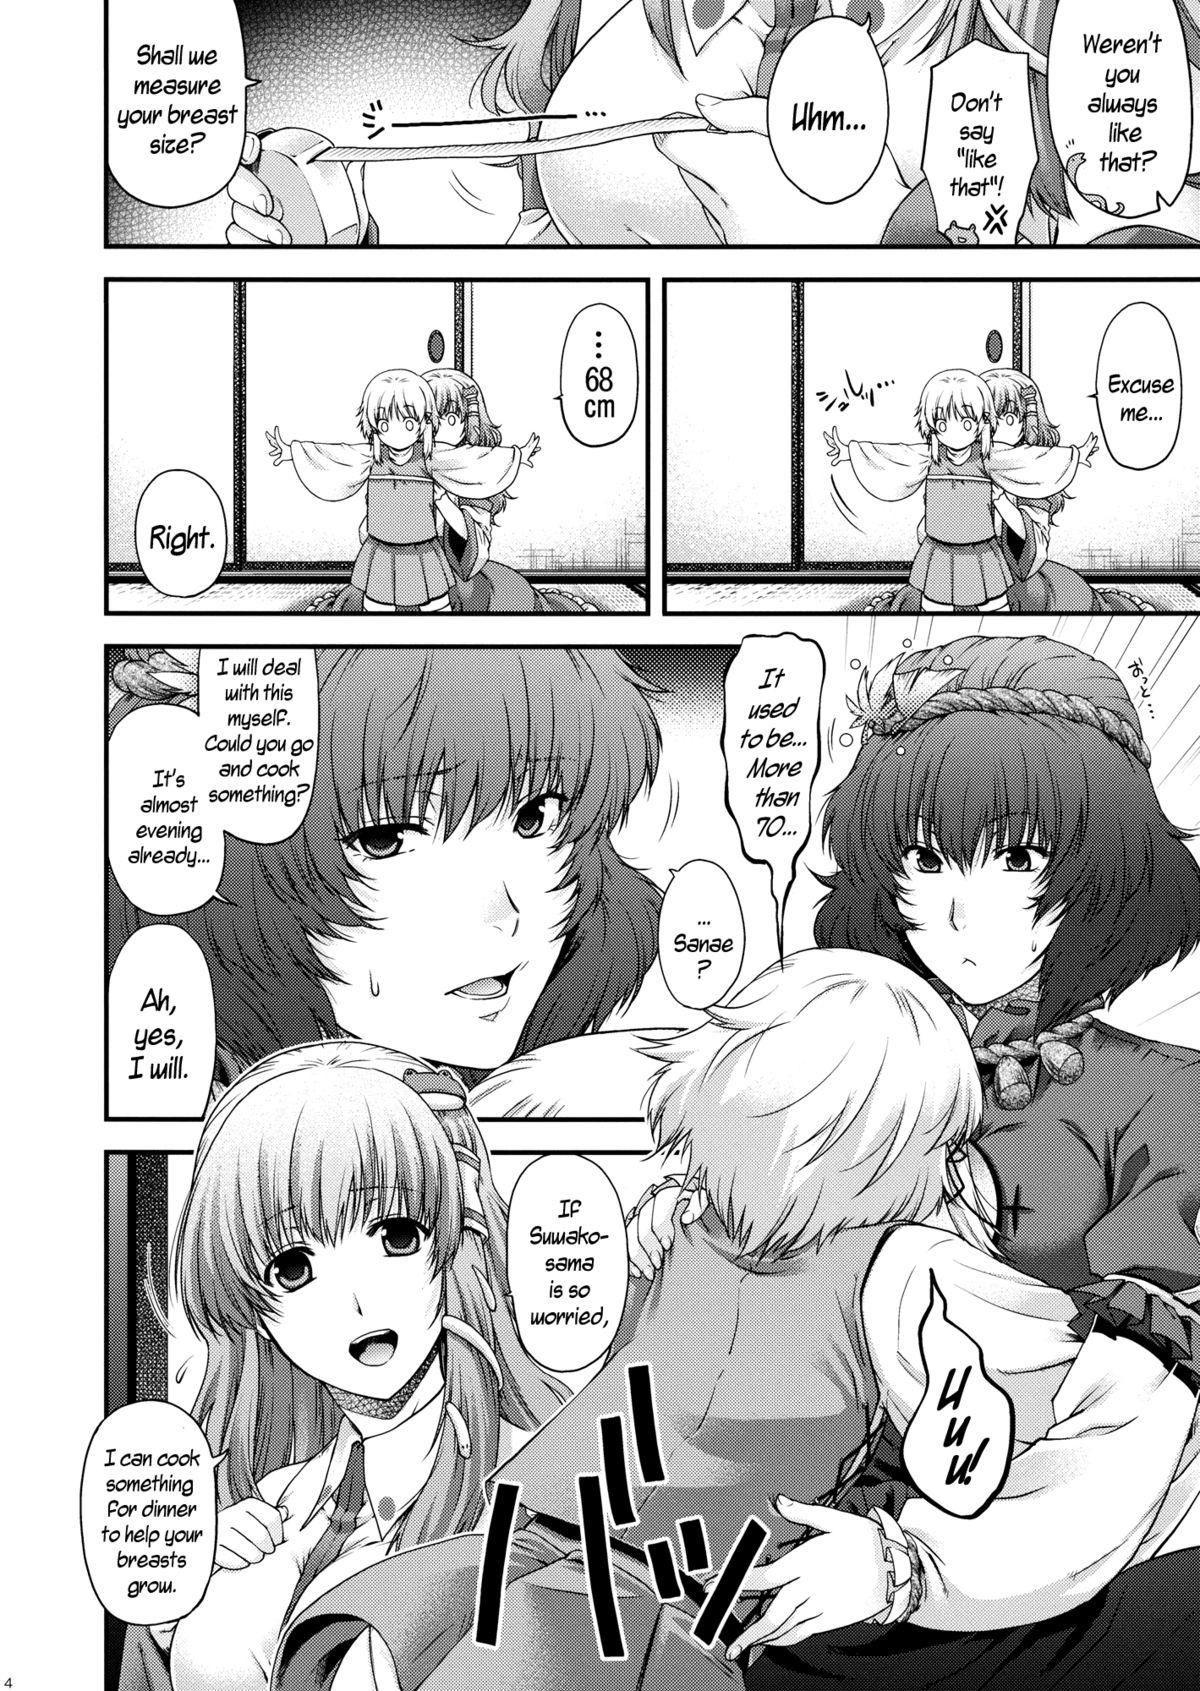 Behind SKB48 - Touhou project Facials - Page 4